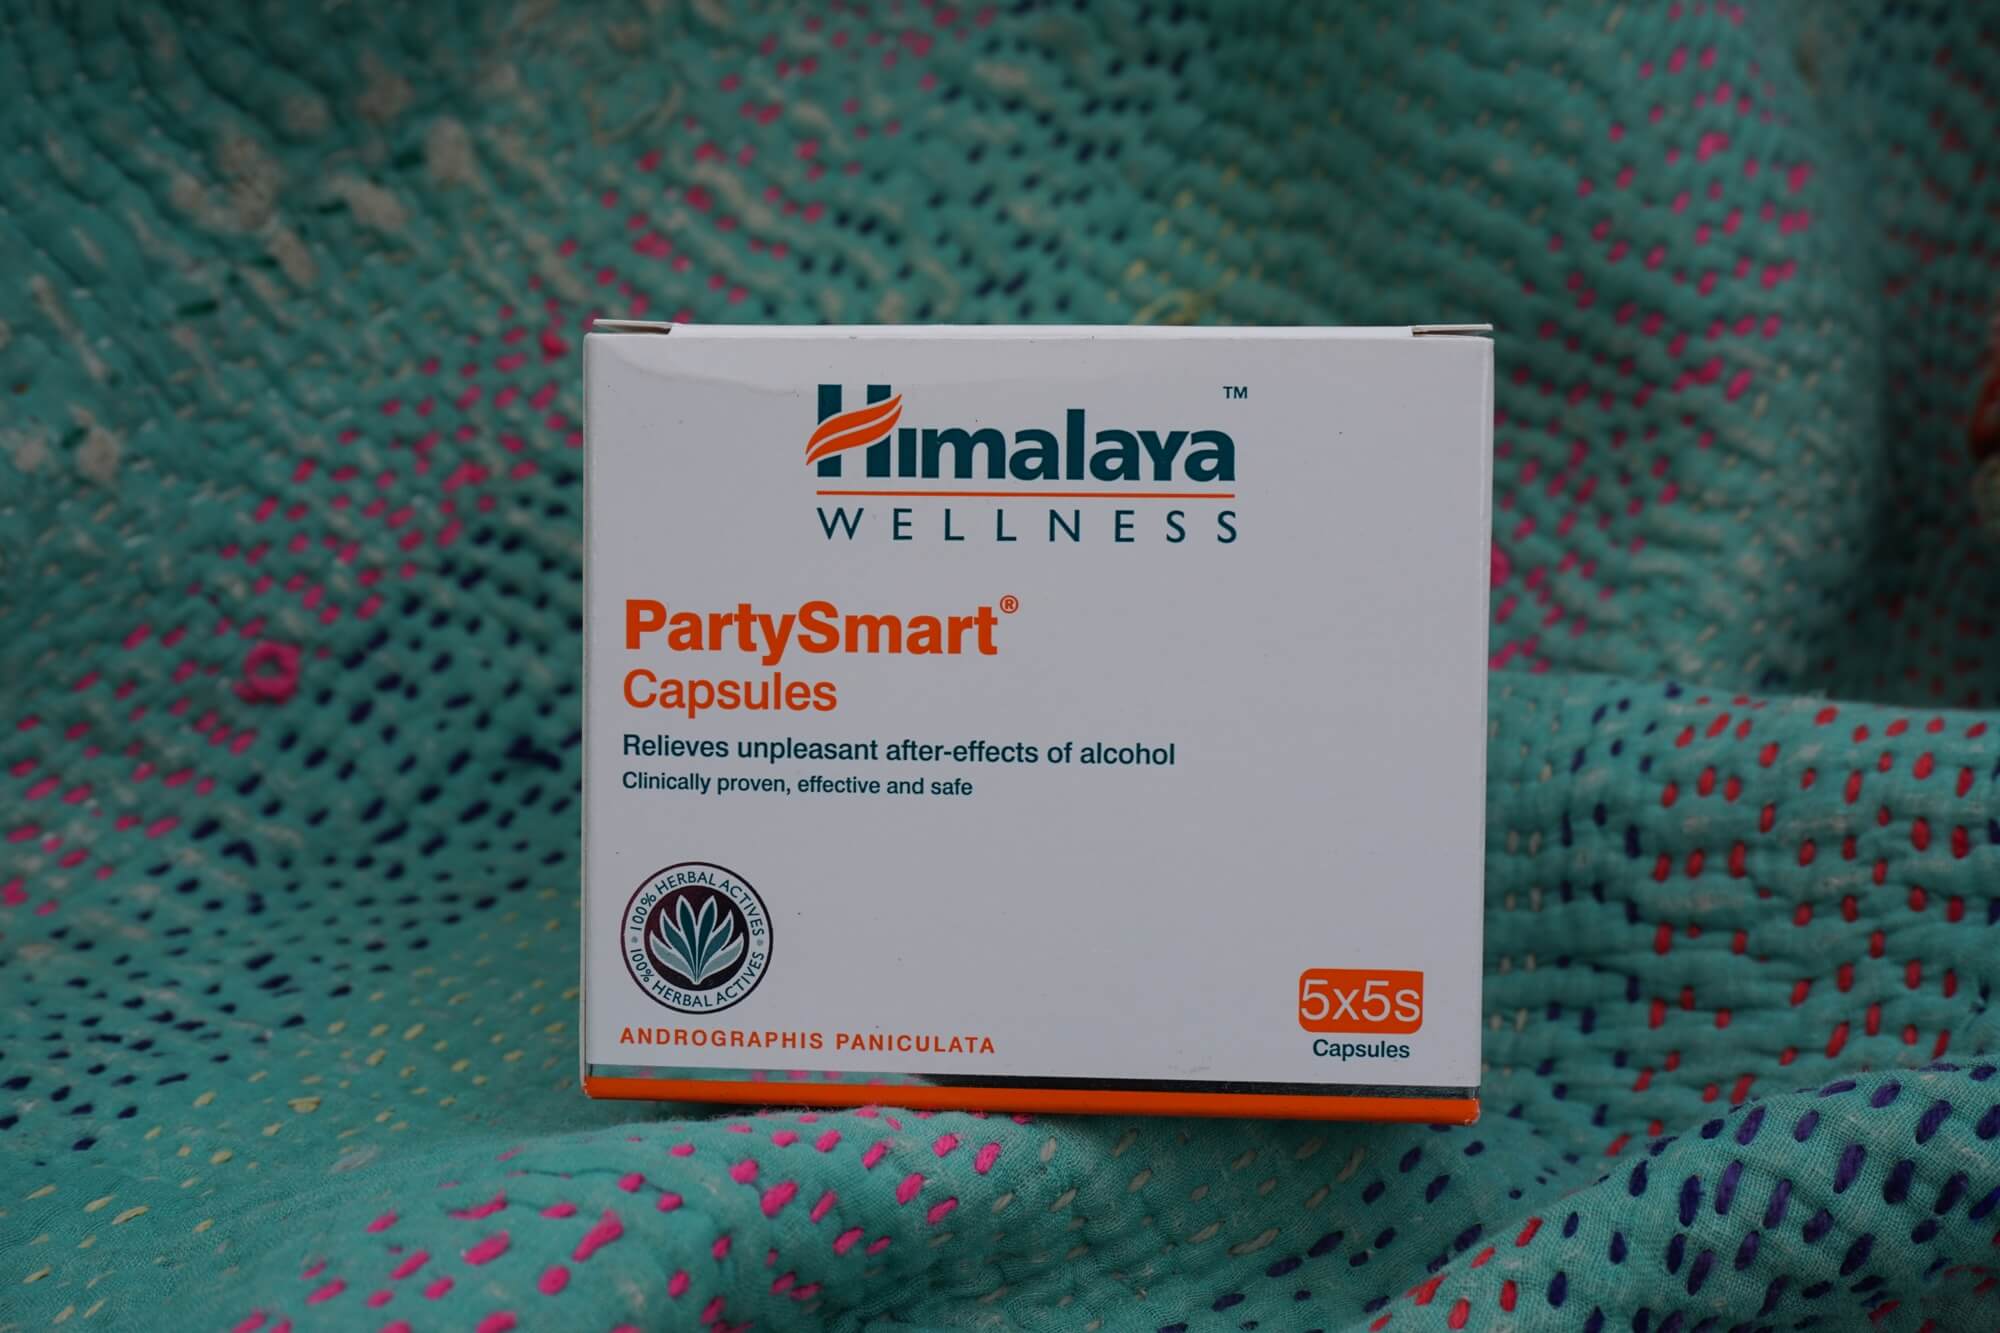 Best ayurvedic souvenirs in India from Himalaya PartySmart pills